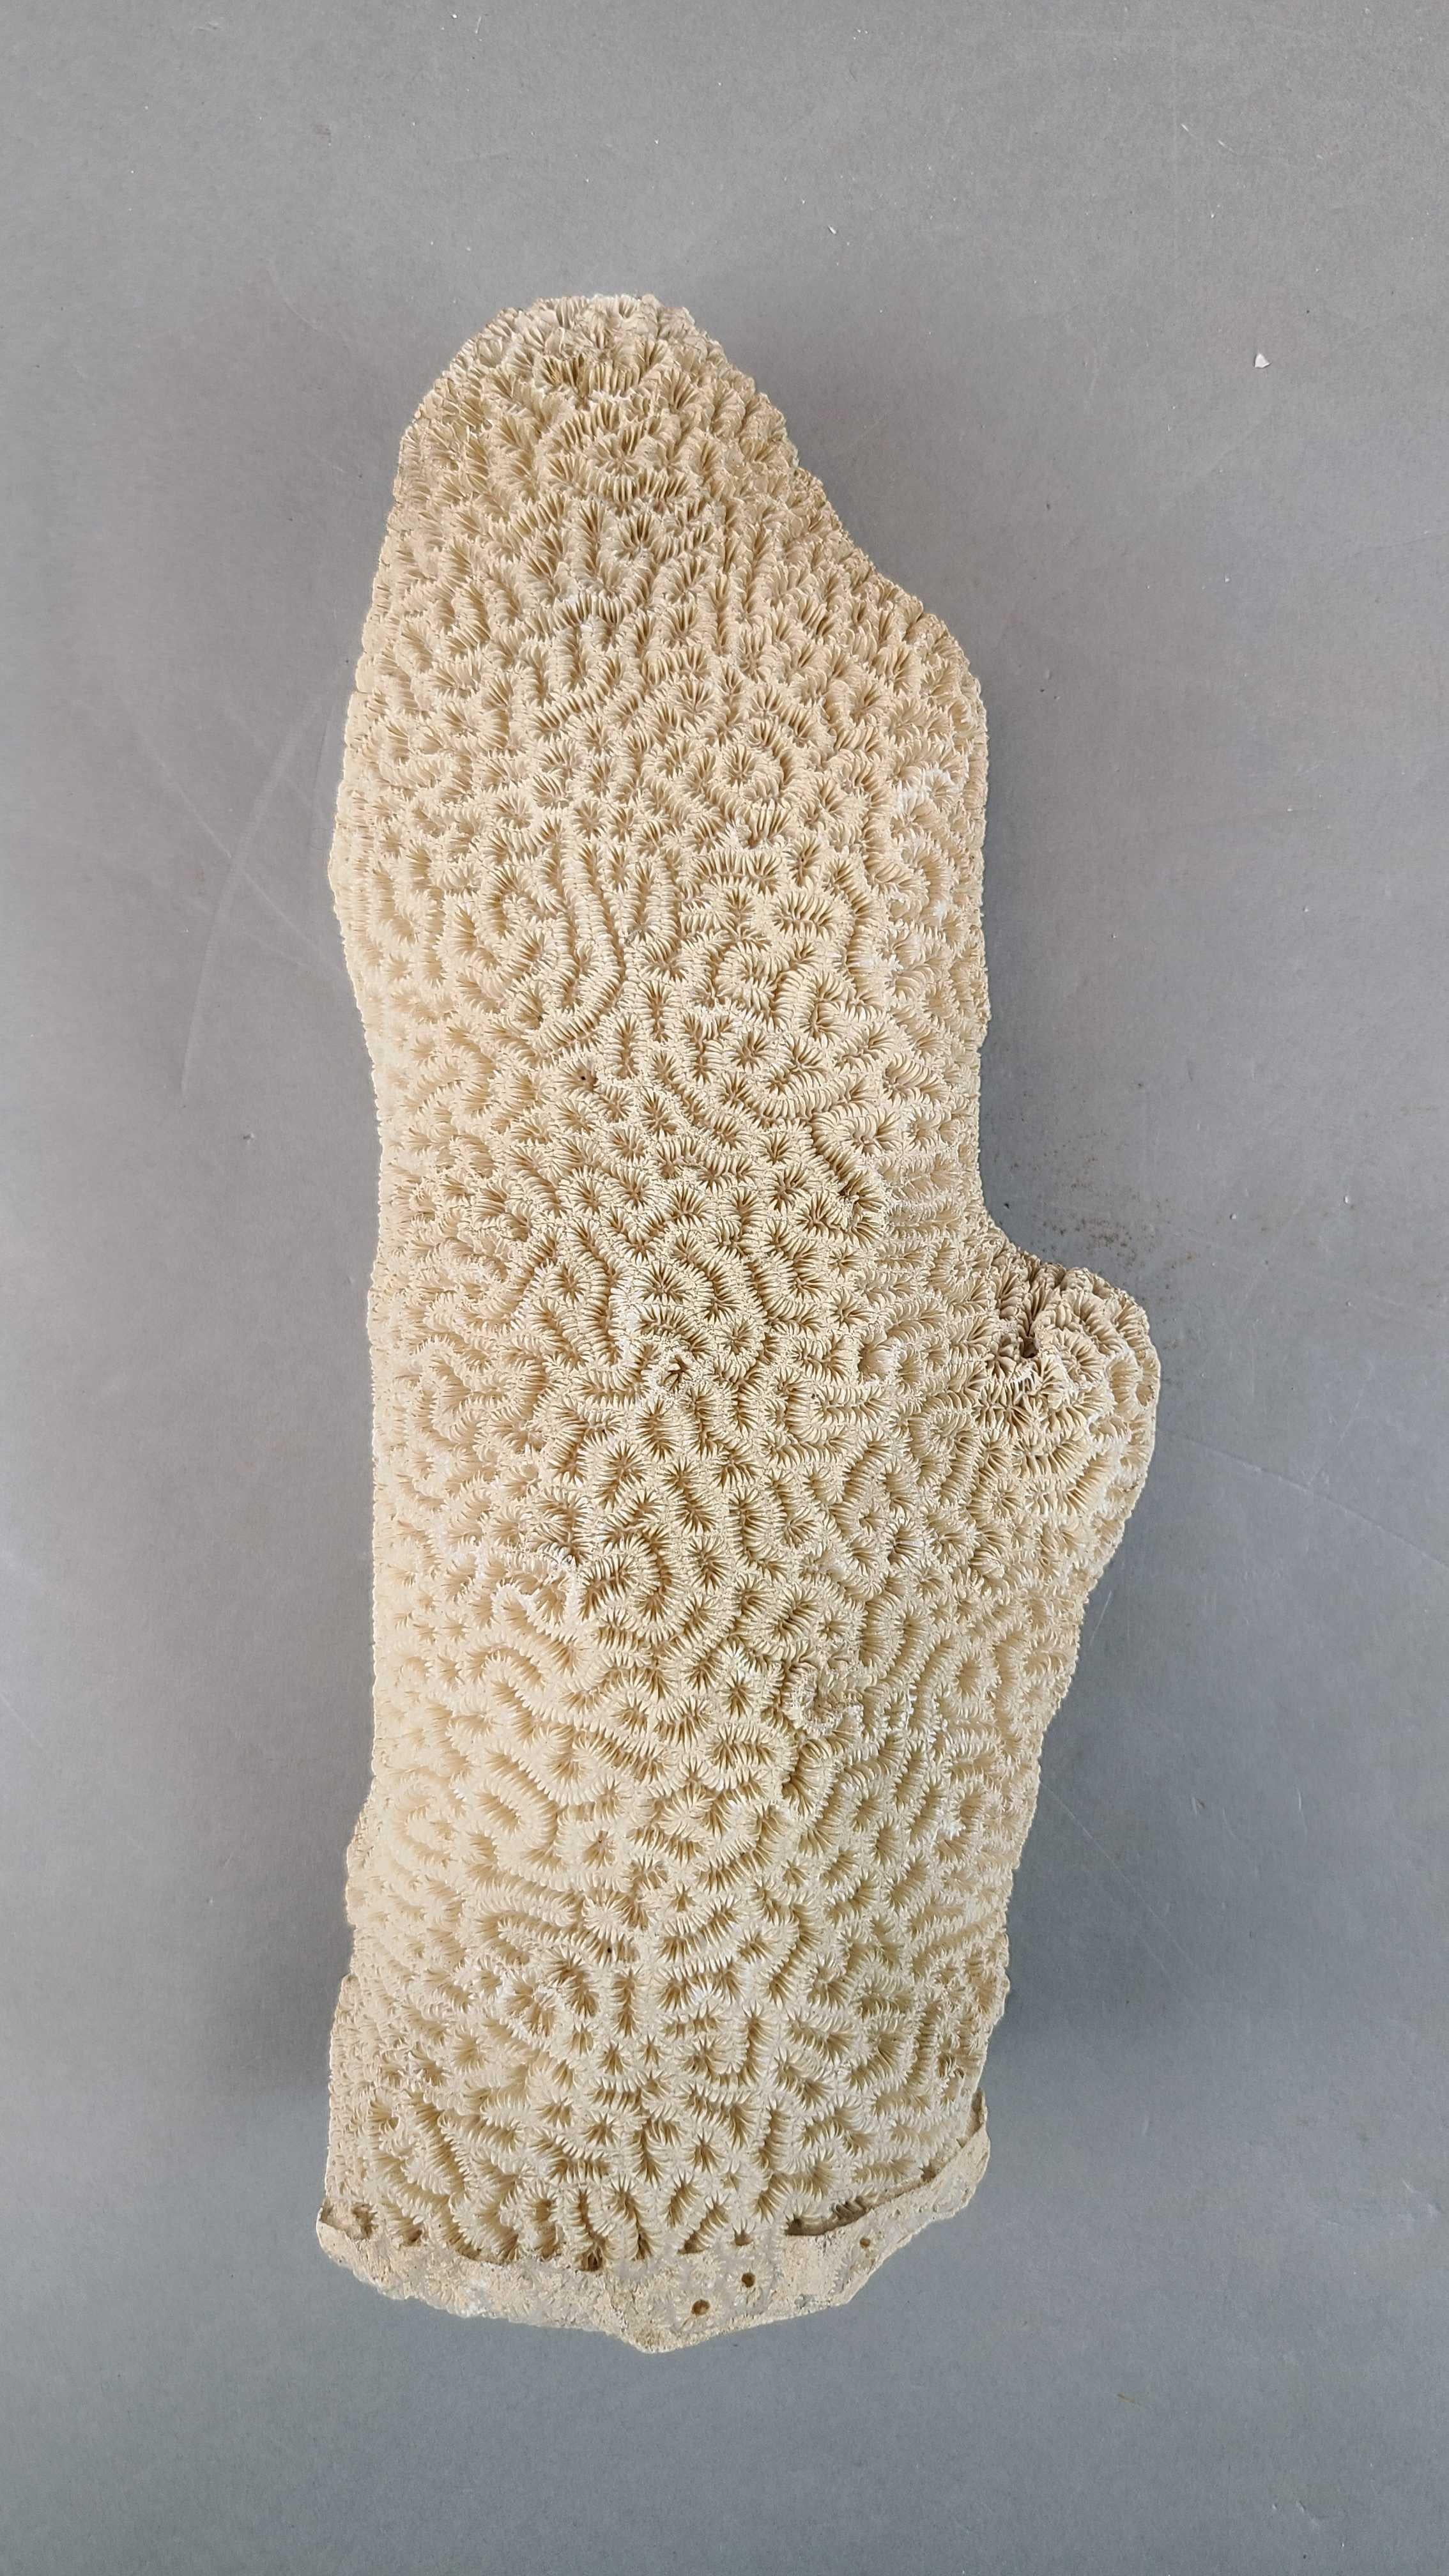 Pair of Natural Standing Brain Coral Obelisks In Good Condition For Sale In Leesburg, VA